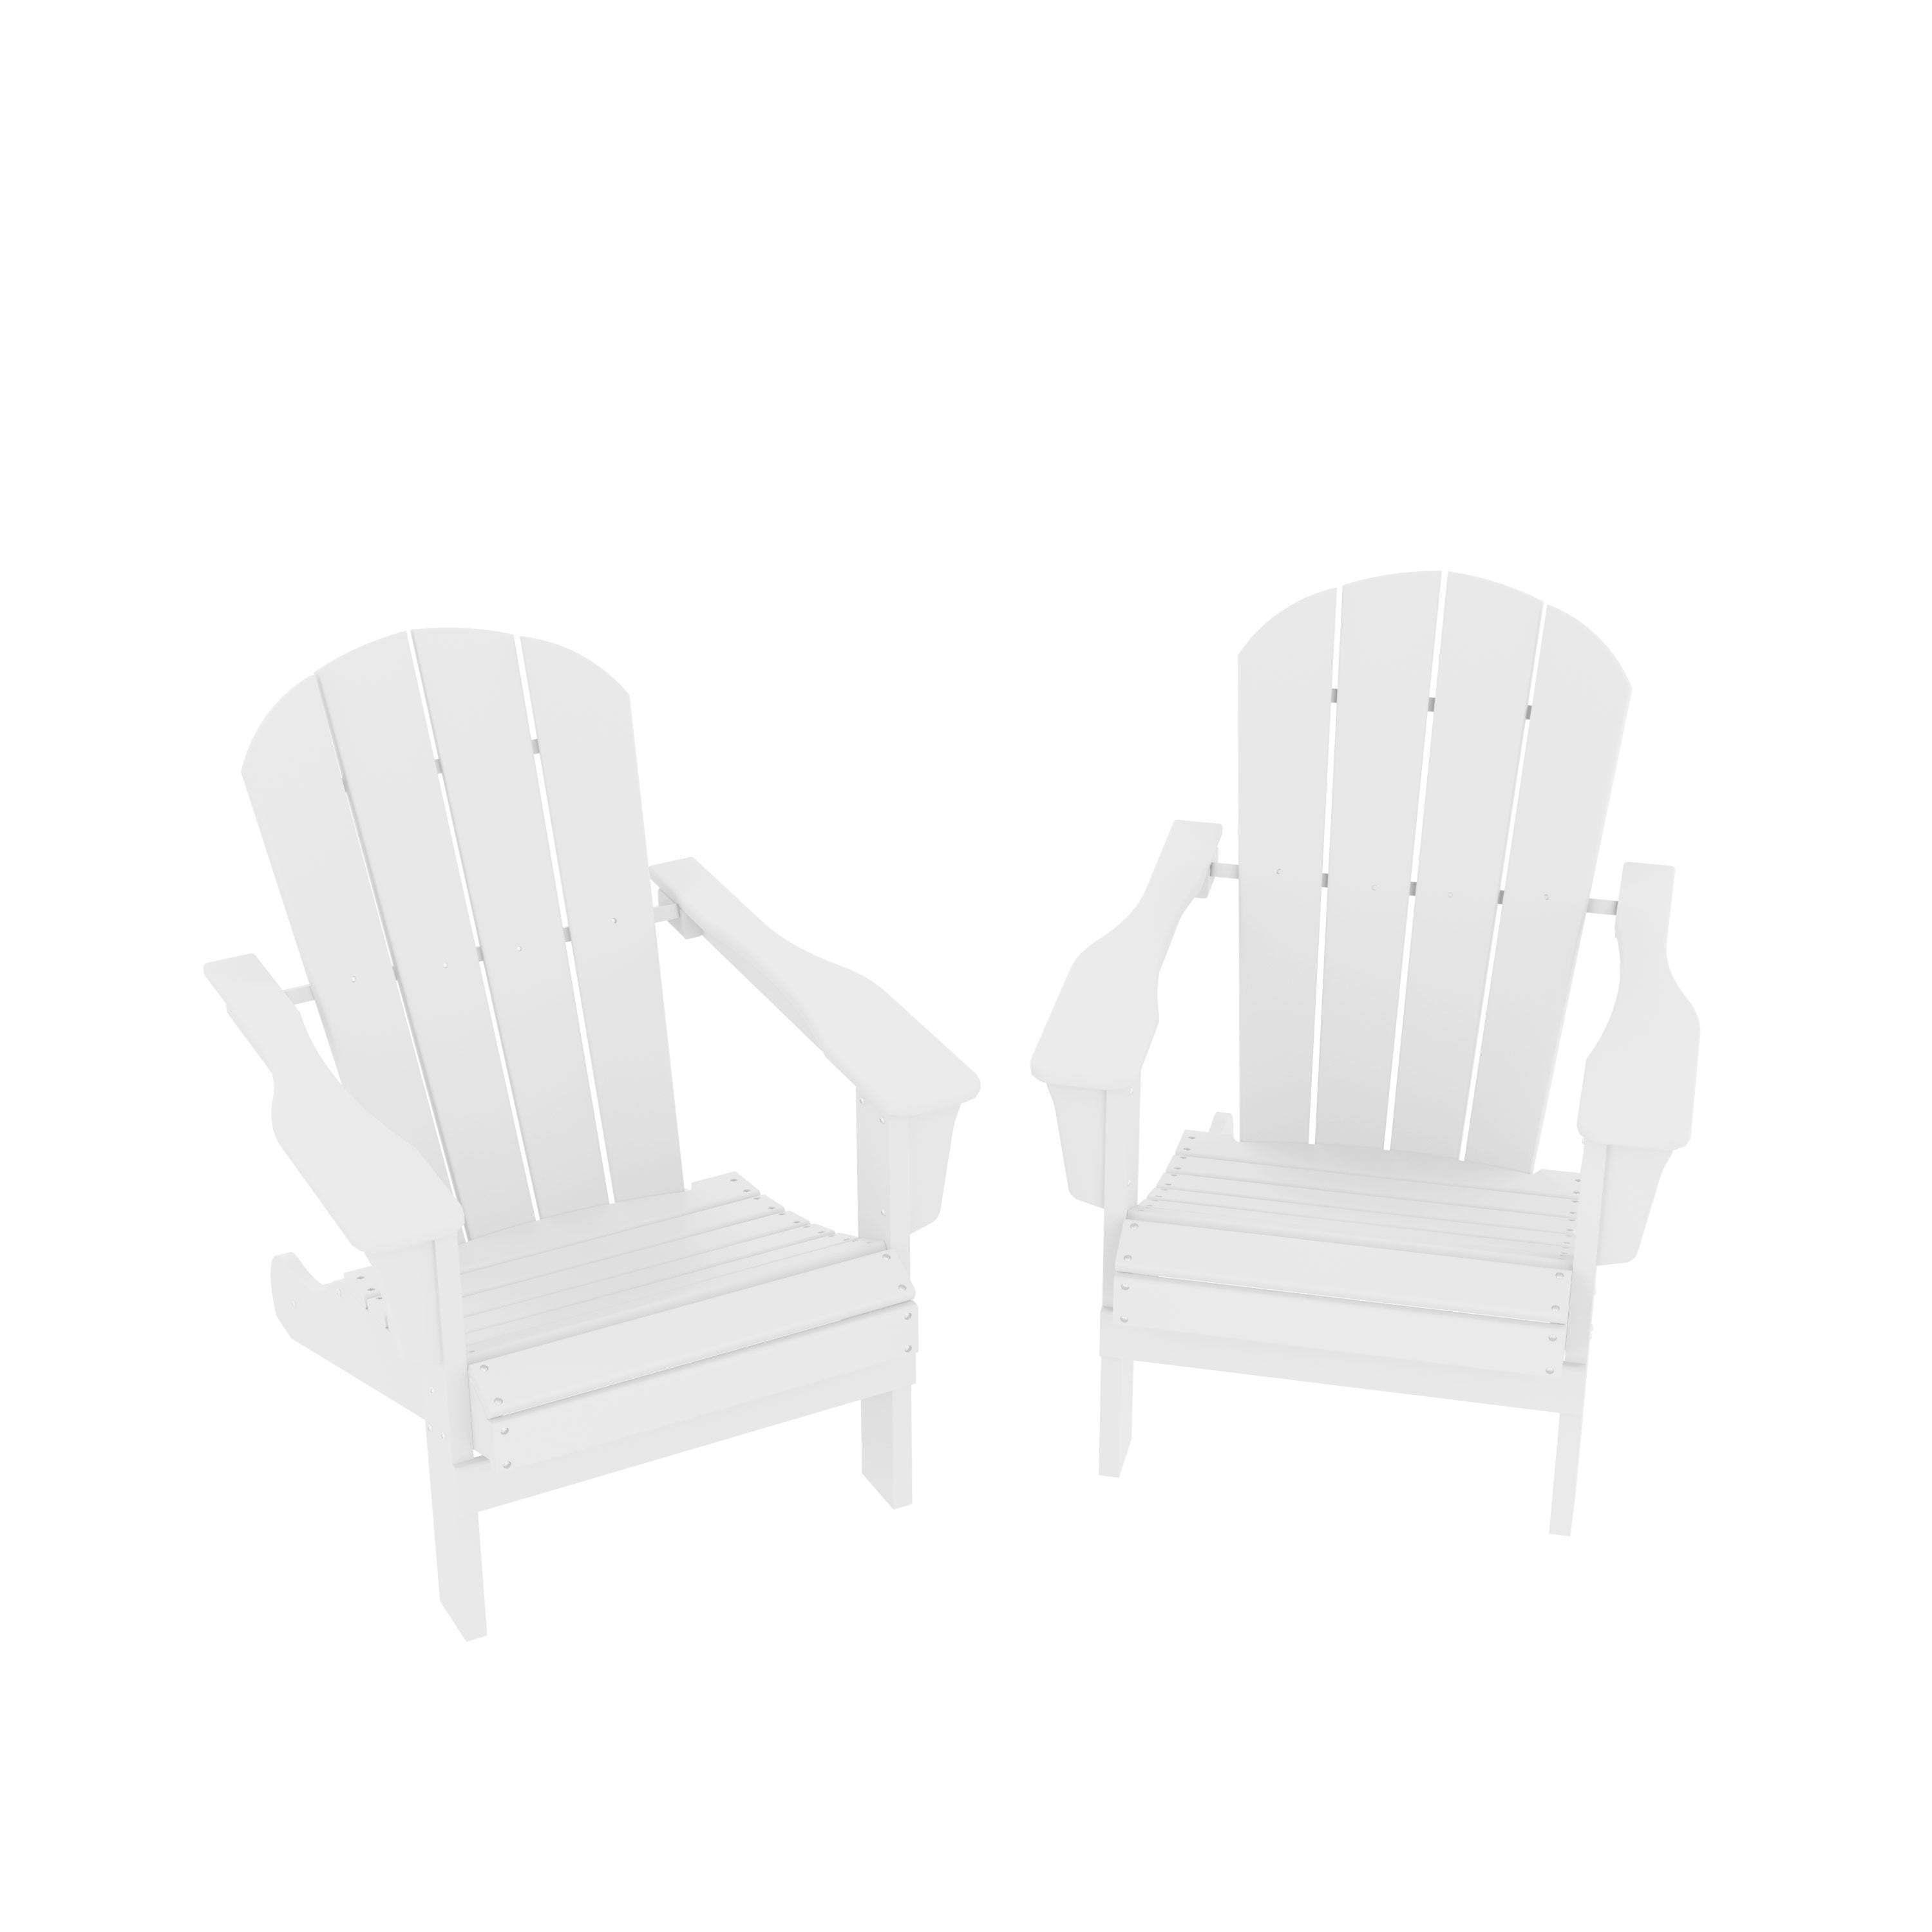 HDPE Adirondack Chair Terrace Outdoor Chair Set of 2 (White)